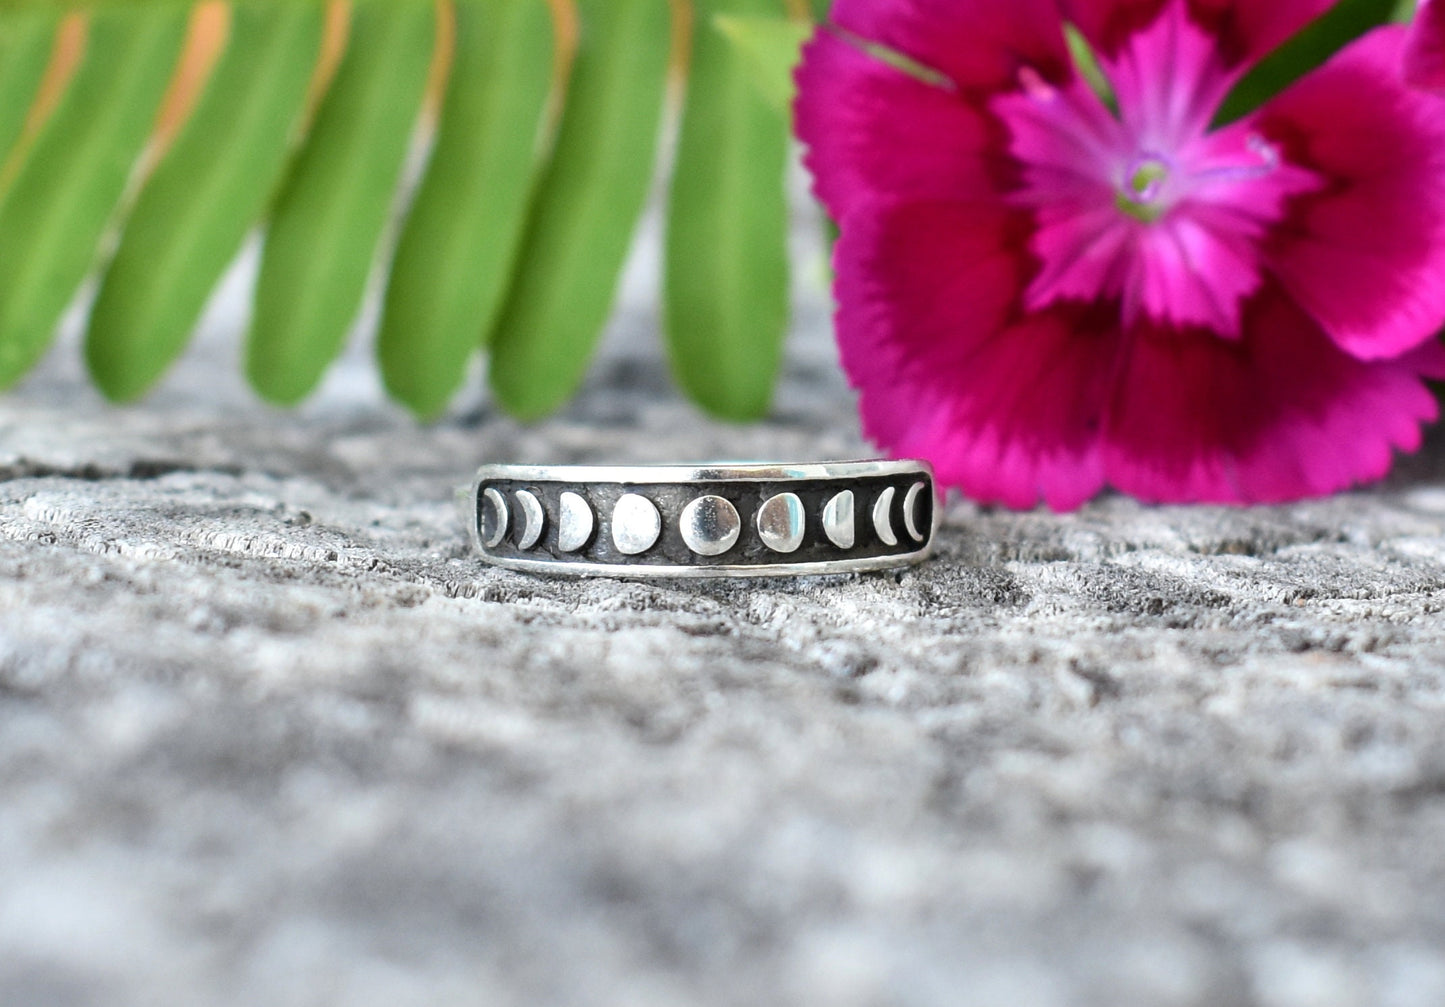 Moon Phase Ring- Moon Phase Jewelry, Silver Moon Ring, Luna Ring, Witchy Ring